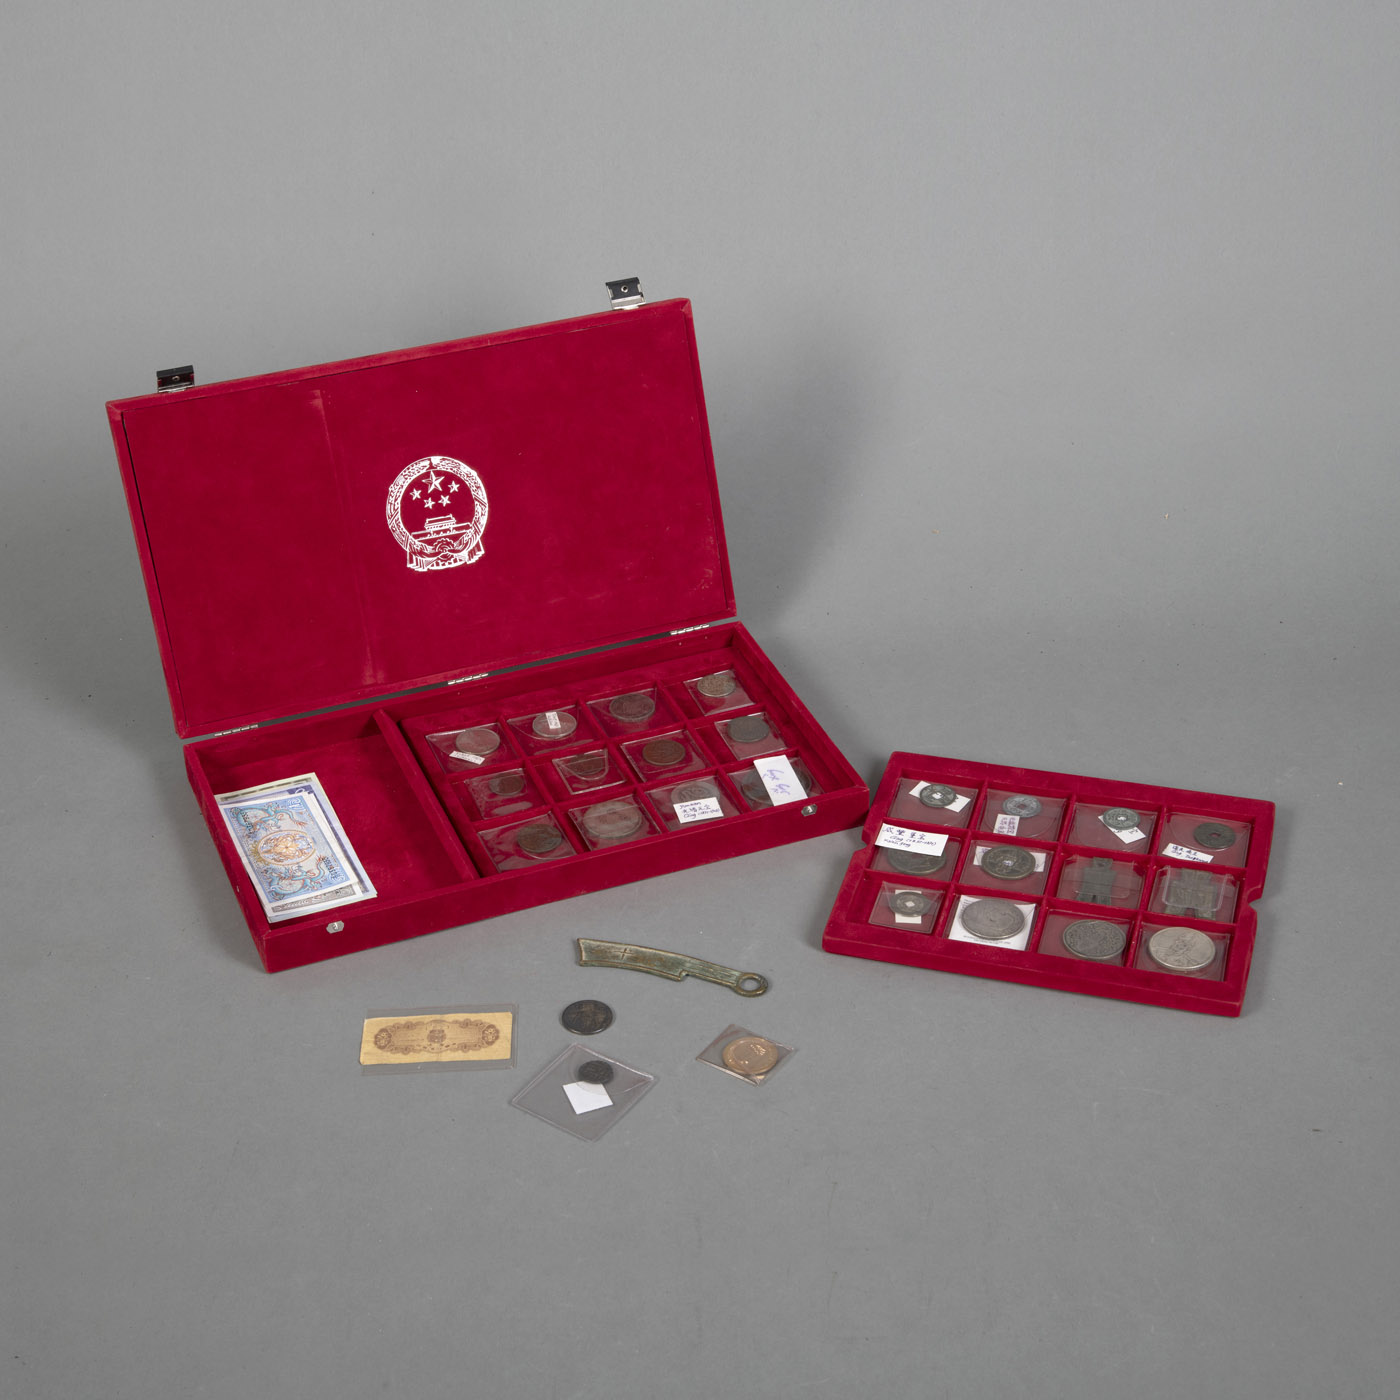 <b>A COLLECTION OF COINS, BANKNOTES AND POSTAGE STAMPS, IN A READ VELVET BOX</b>